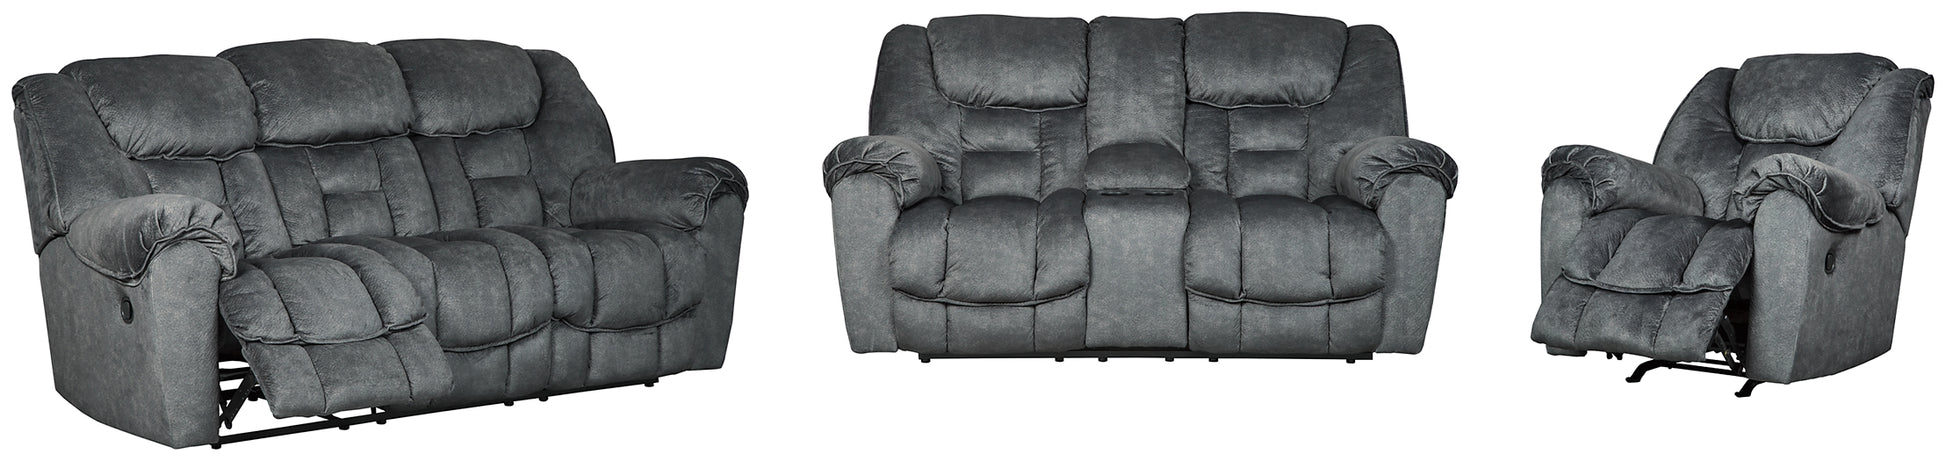 Capehorn Sofa, Loveseat and Recliner JB's Furniture  Home Furniture, Home Decor, Furniture Store